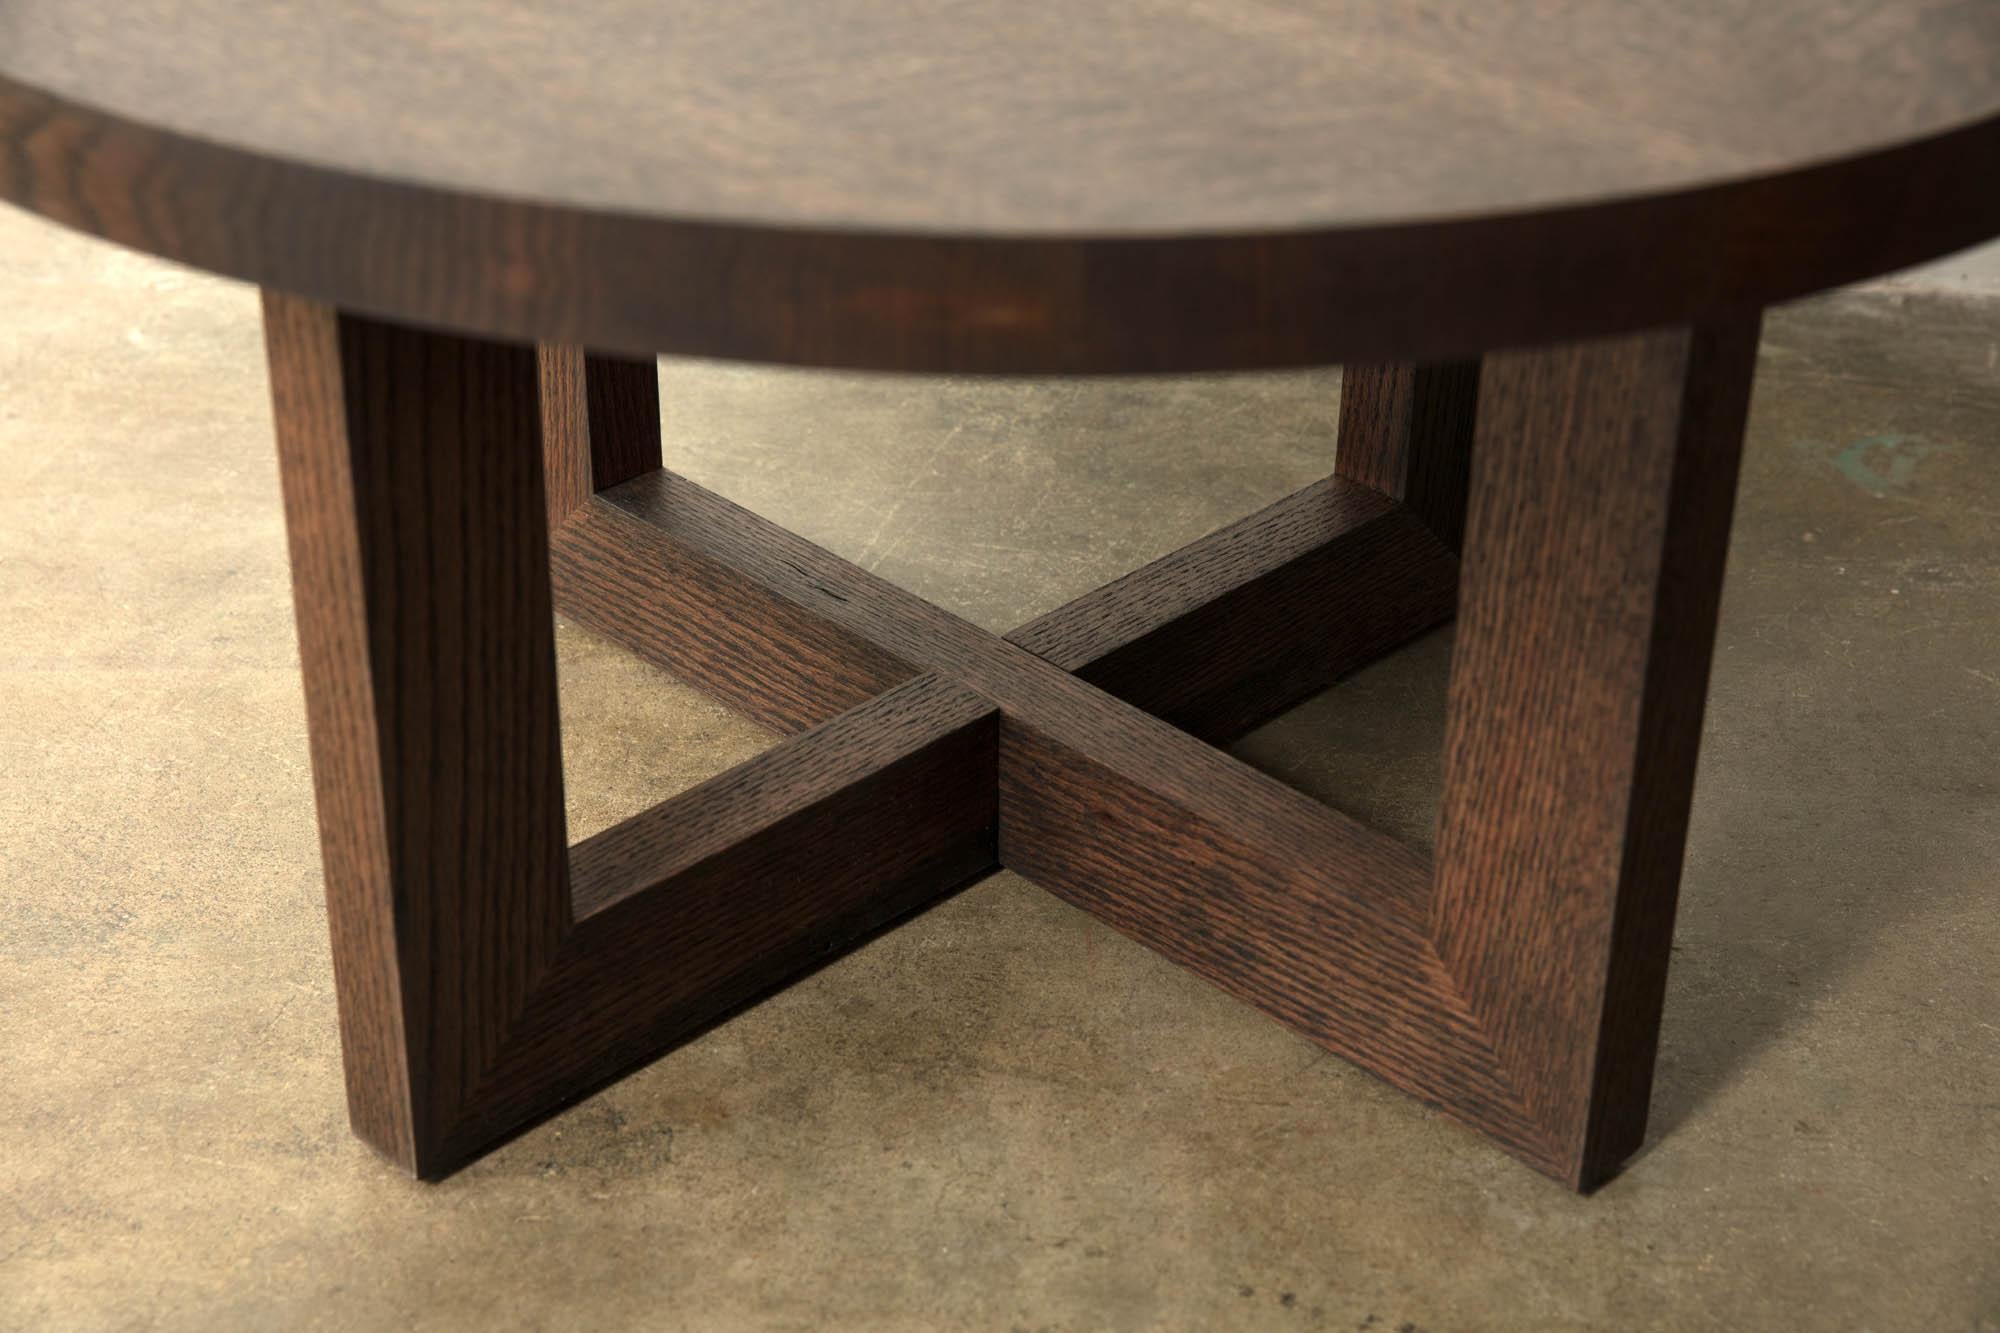 Solid wood from the urban forest imbues this Round Wood Coffee Table in Darkened Urban Oak with a unique grain and texture. The dark walnut color gives a defined, modern silhouette. This piece works for a residential living room or sitting room, as